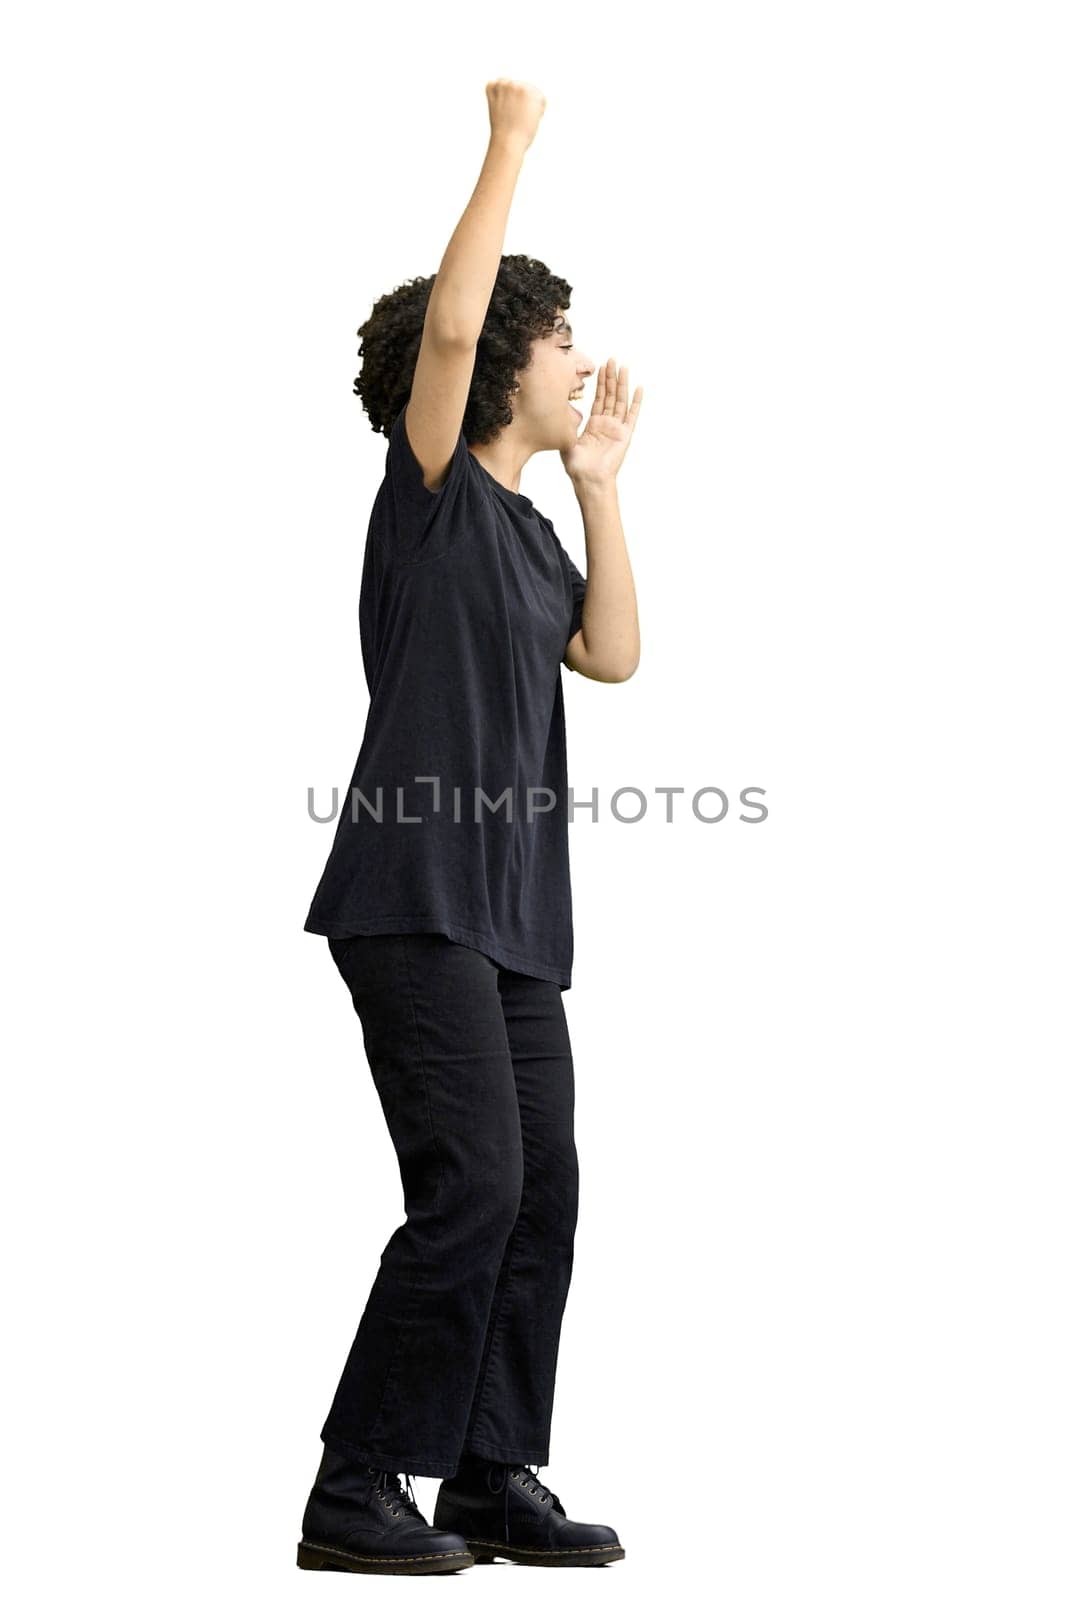 A woman, full-length, on a white background, rejoices.